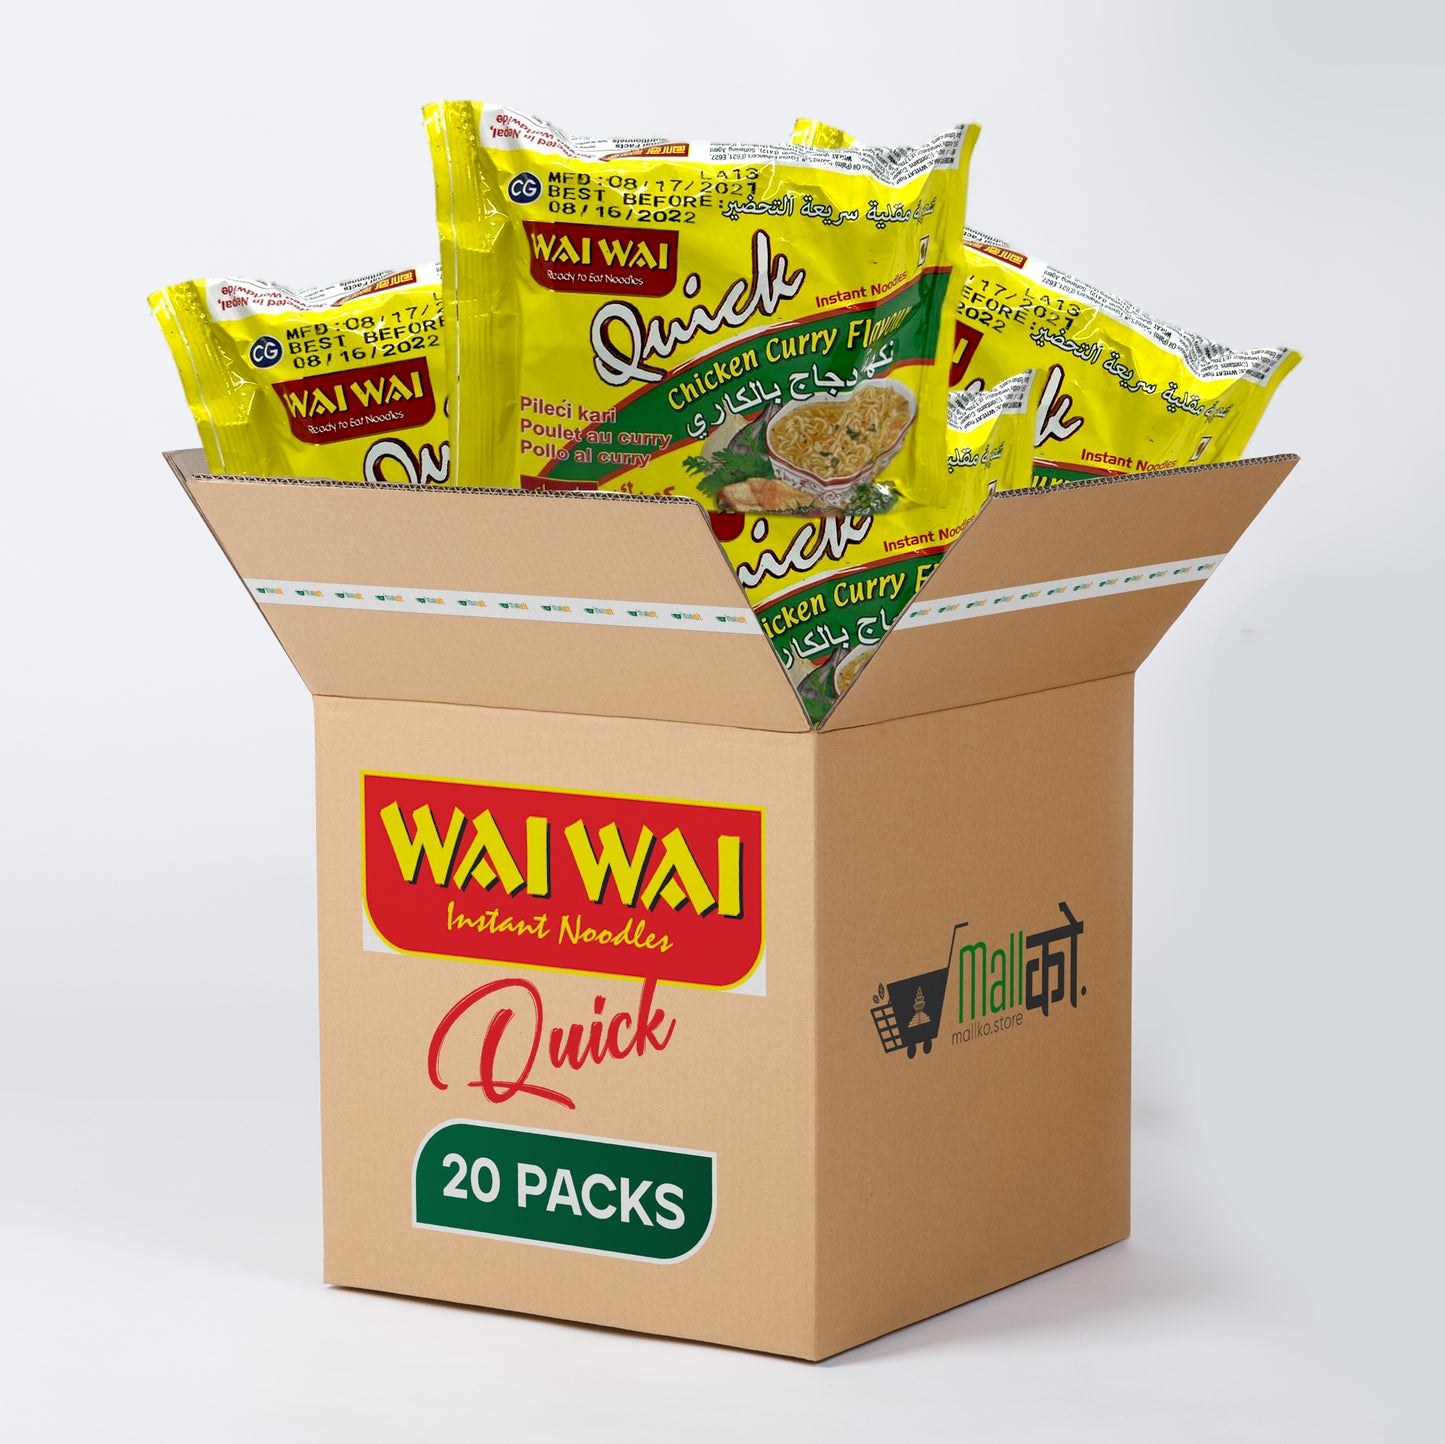 Wai Wai Quick Noodles- Chicken Curry Flavor 20 Packs